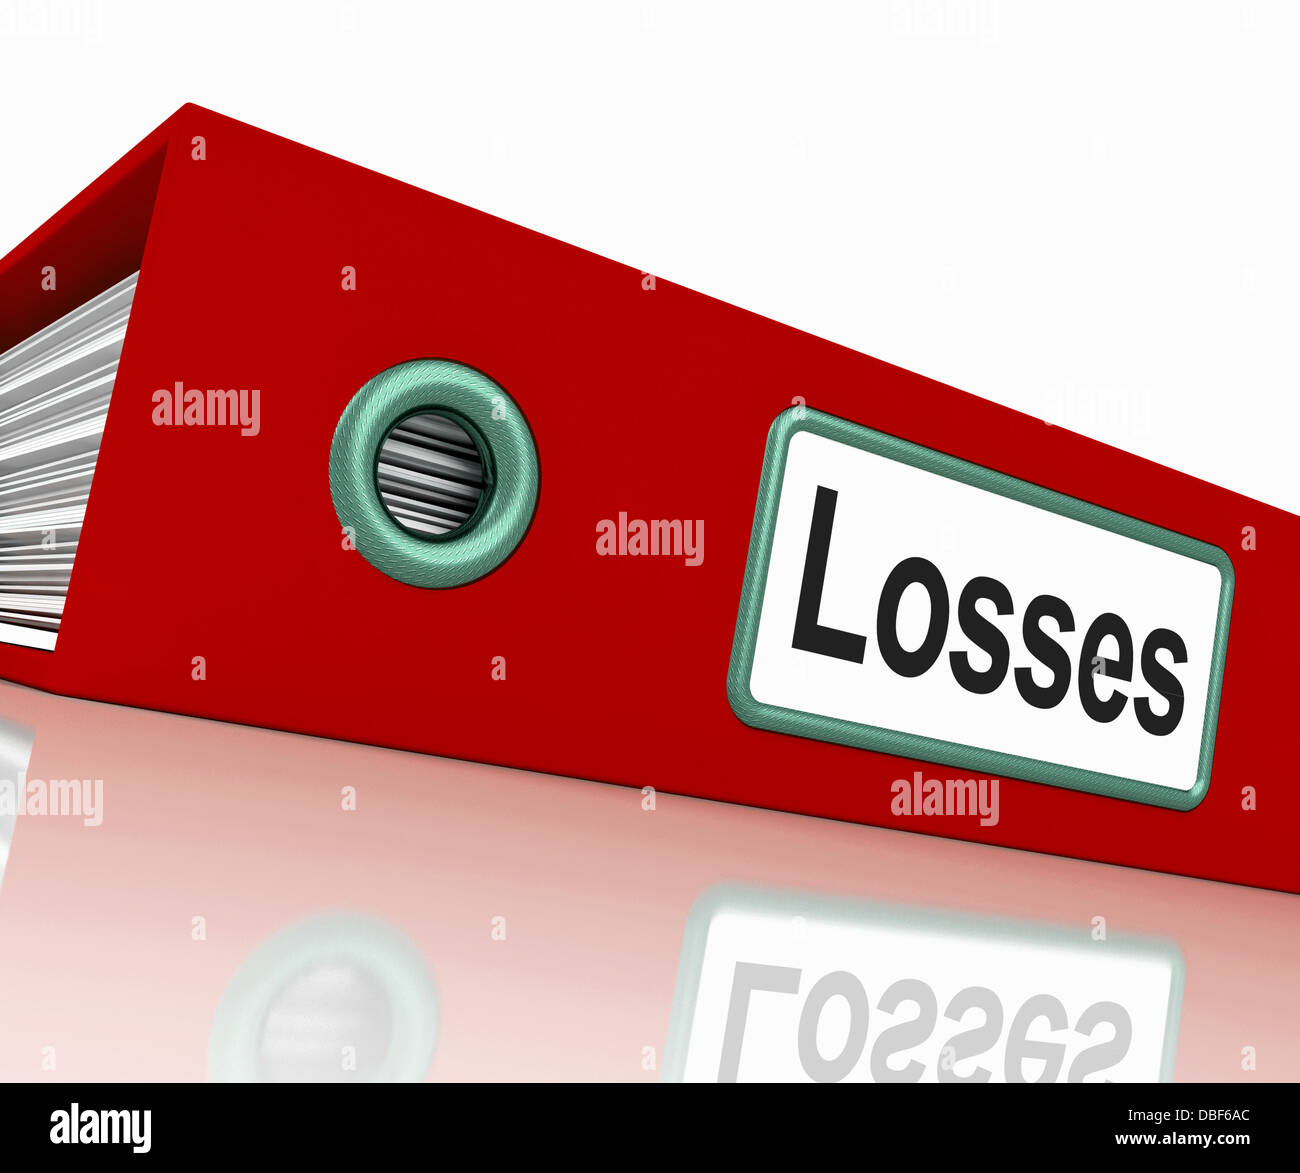 Losses File Contains Accounting Documents And Reports Stock Photo